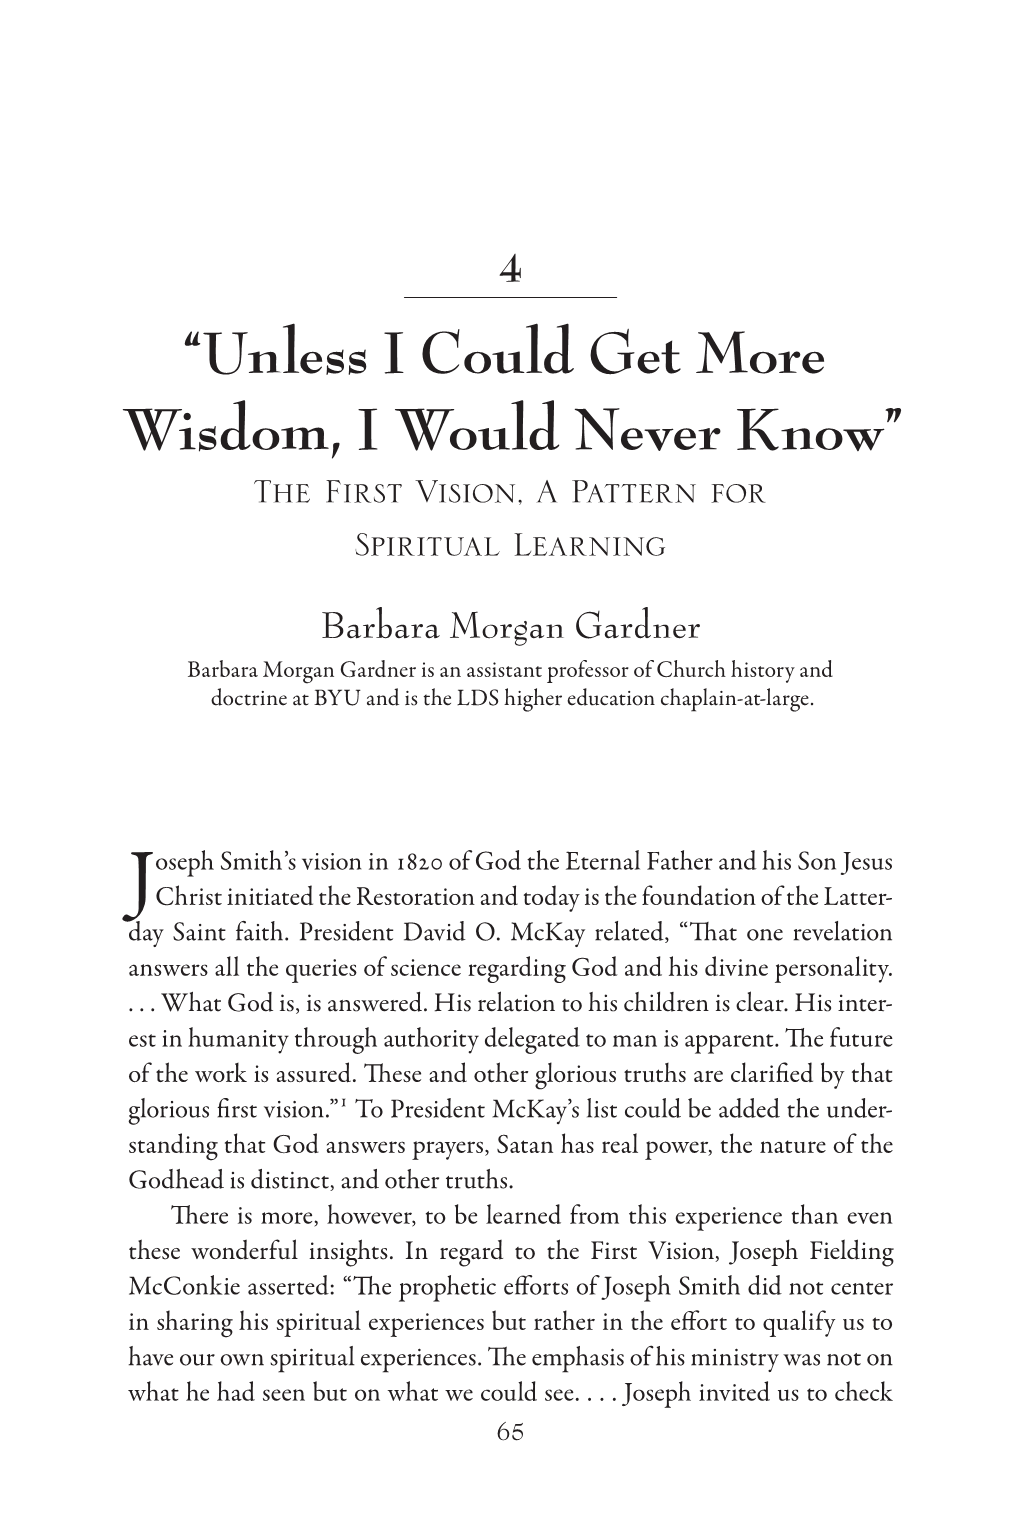 “Unless I Could Get More Wisdom, I Would Never Know” the First Vision, a Pattern for Spiritual Learning